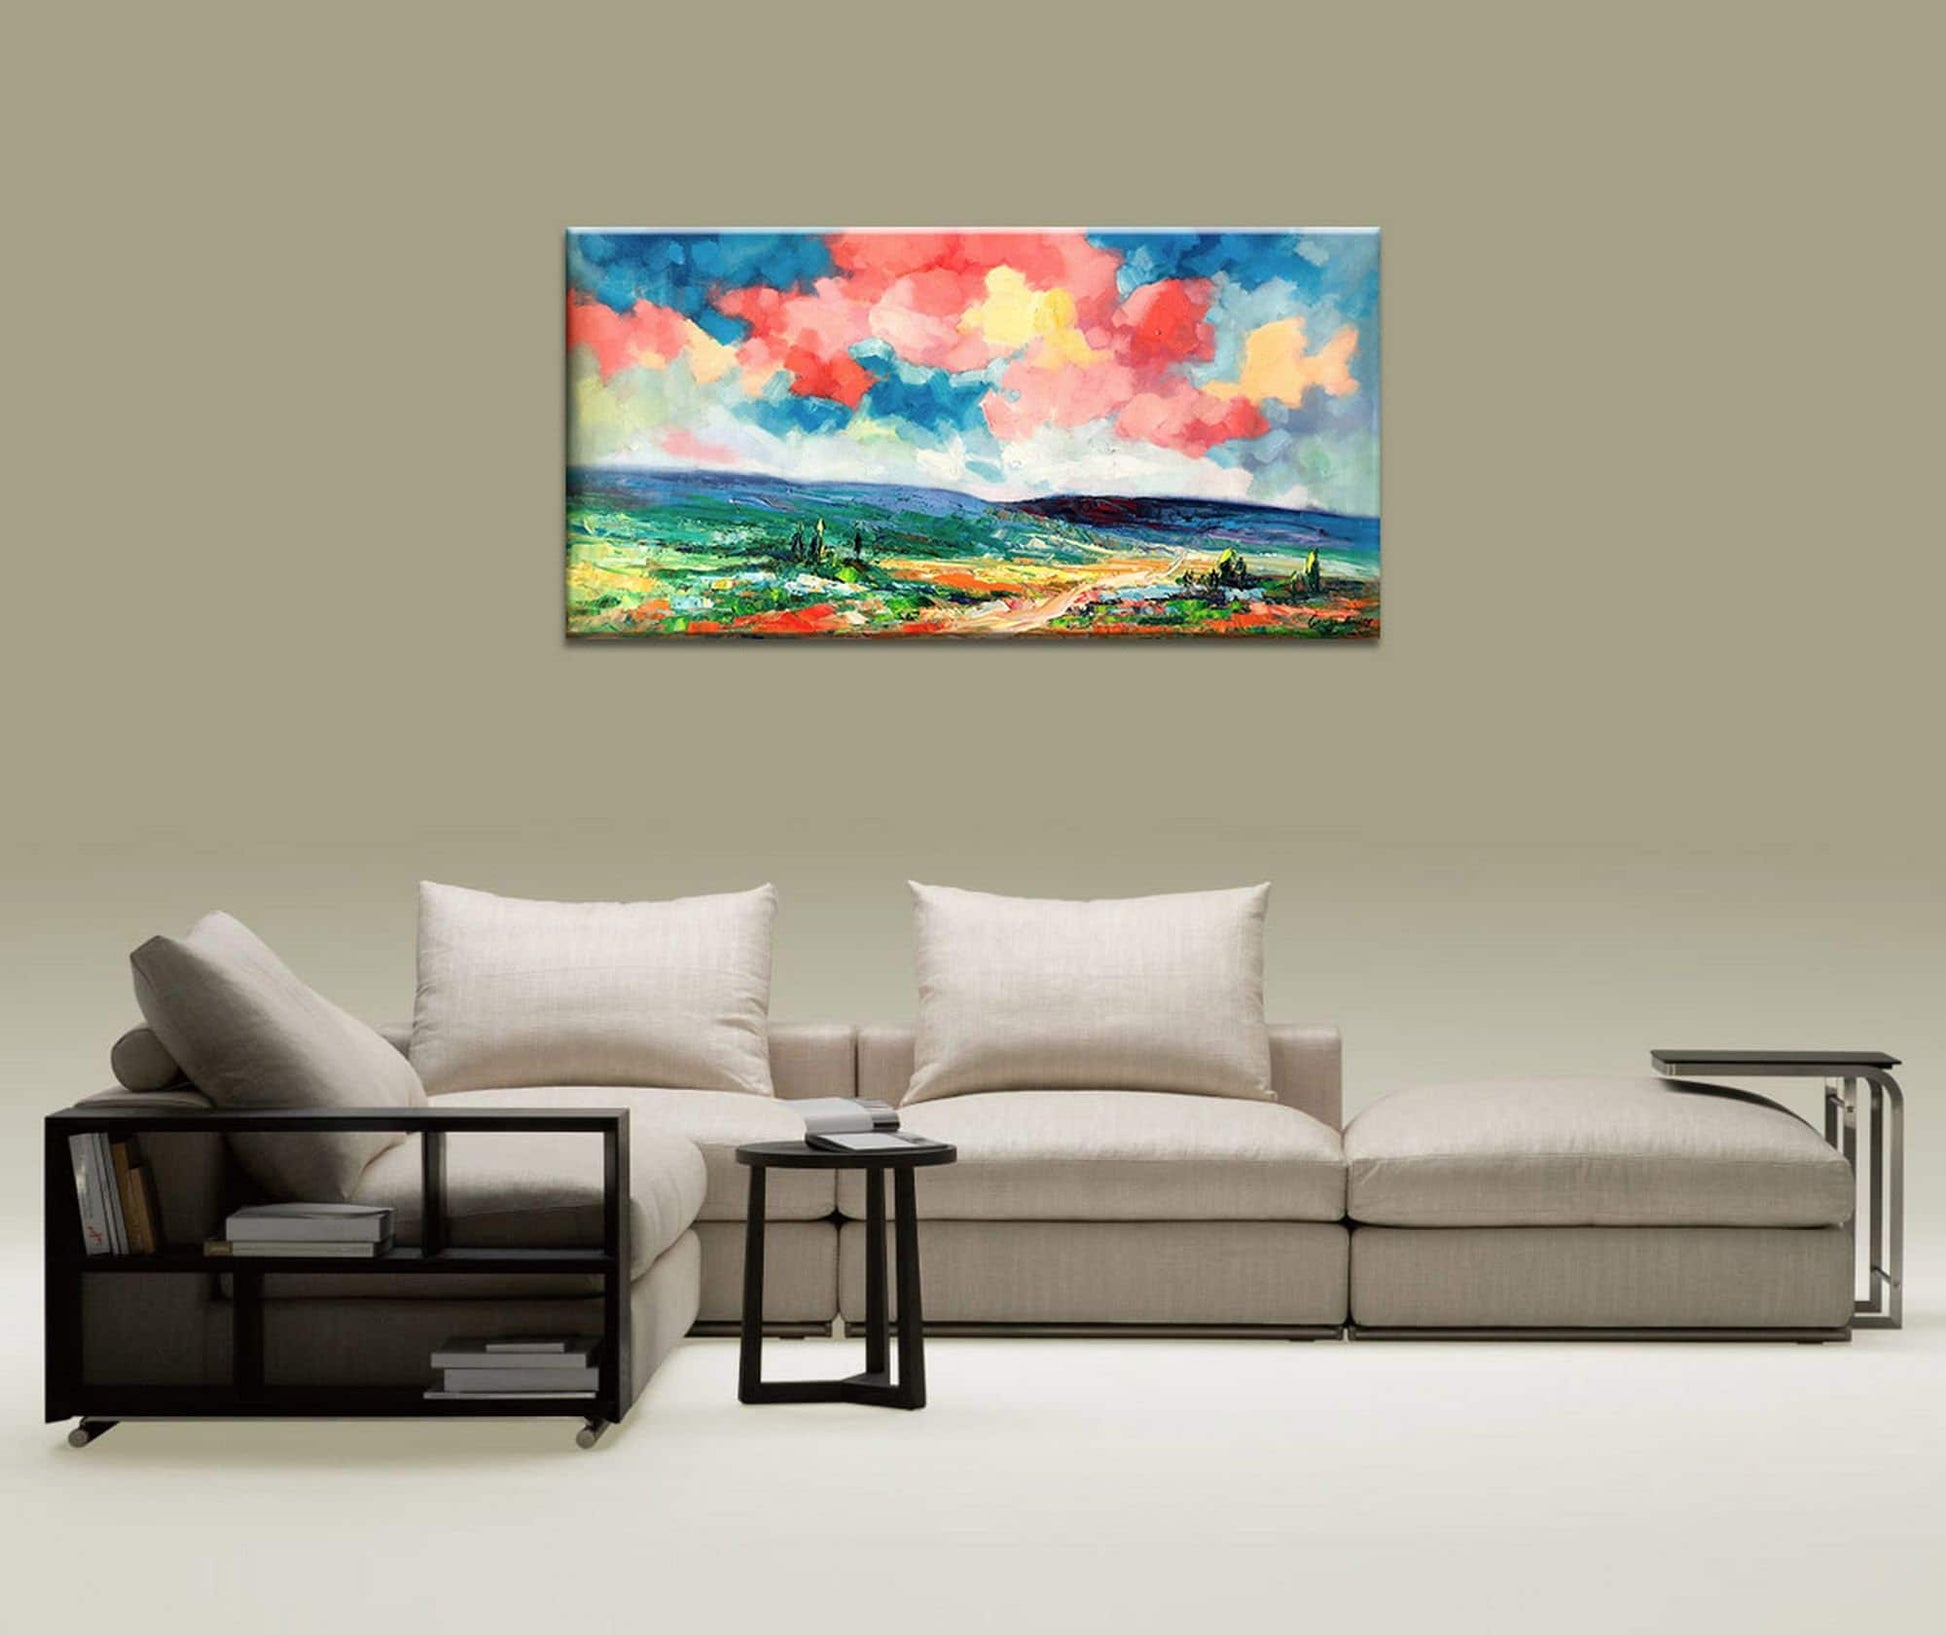 Large Oil Painting, Original Abstract Art, Large Wall Art Painting, Abstract Canvas Painting, Original Oil Painting Landscape, Tuscany Art